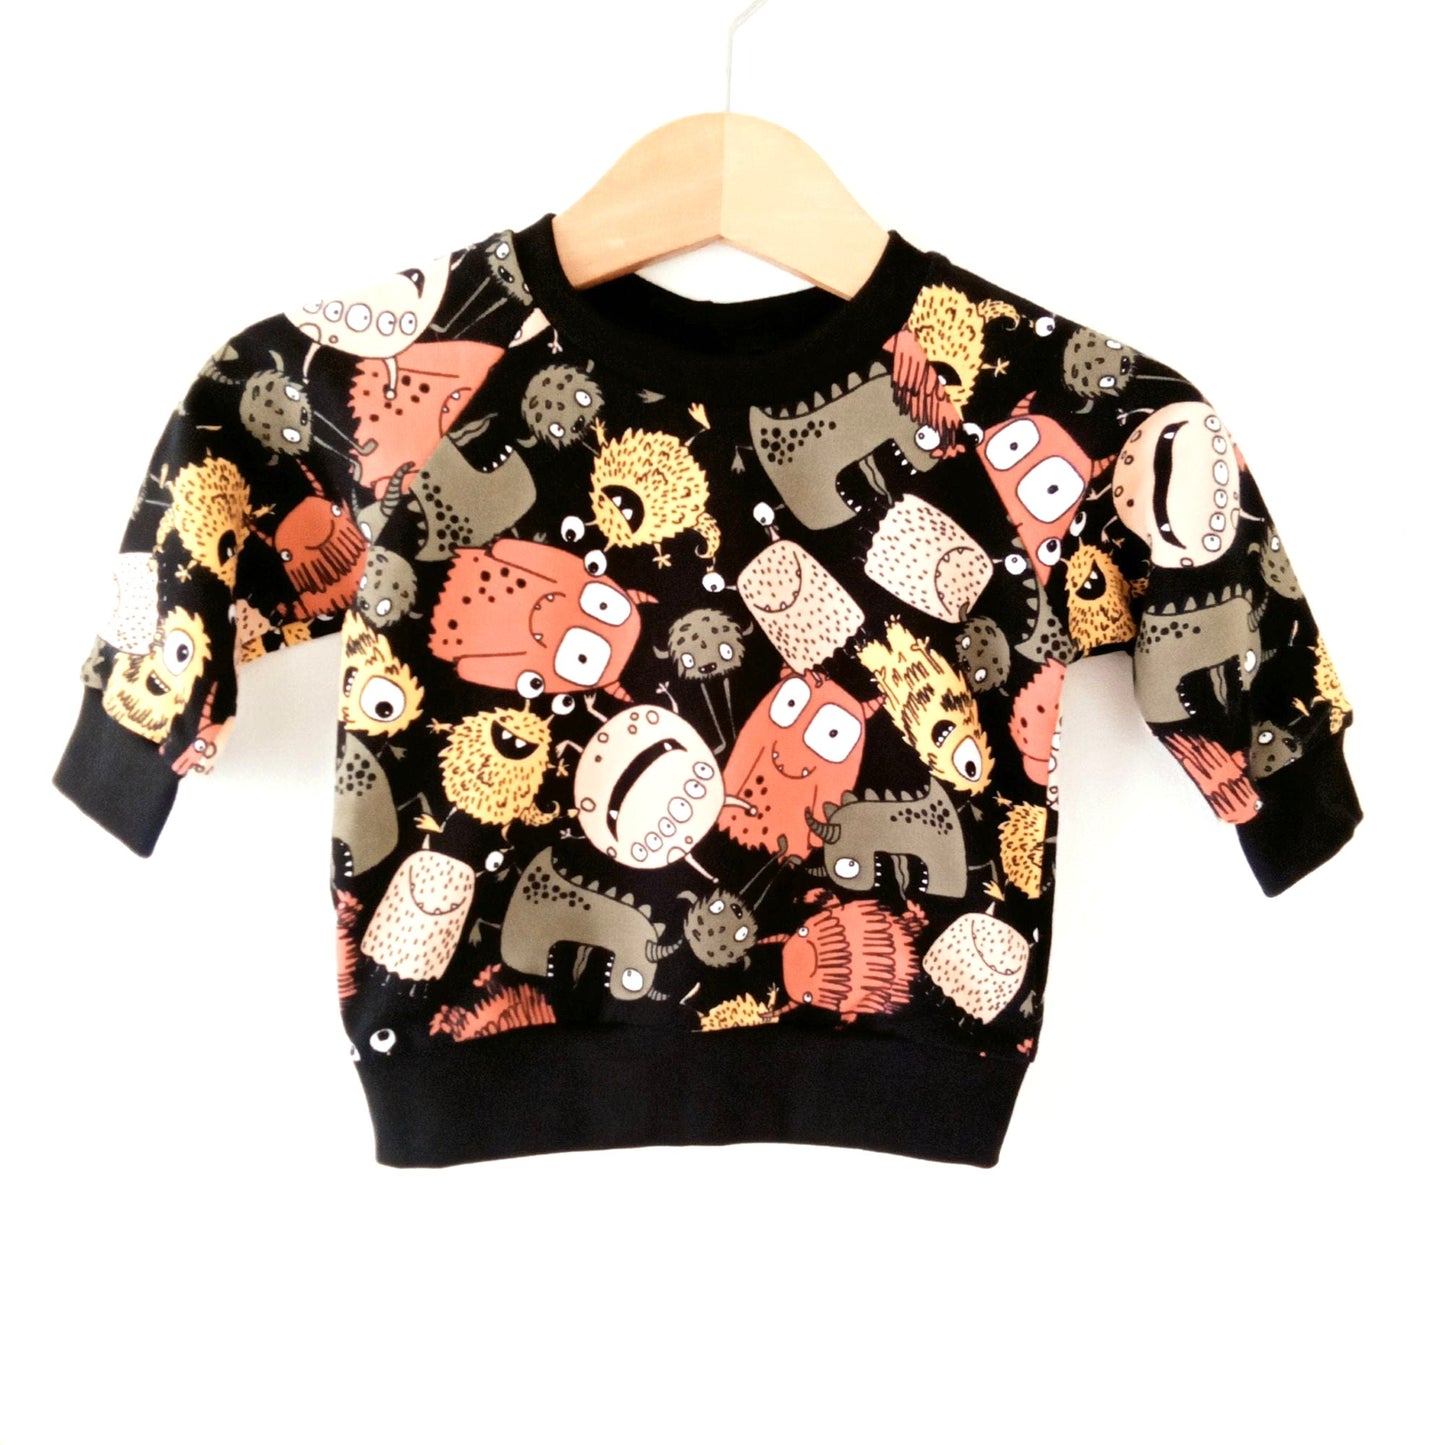 Still life of a black Khudu Kids baby sweatshirt, featuring colourful cartoon monsters and aliens.